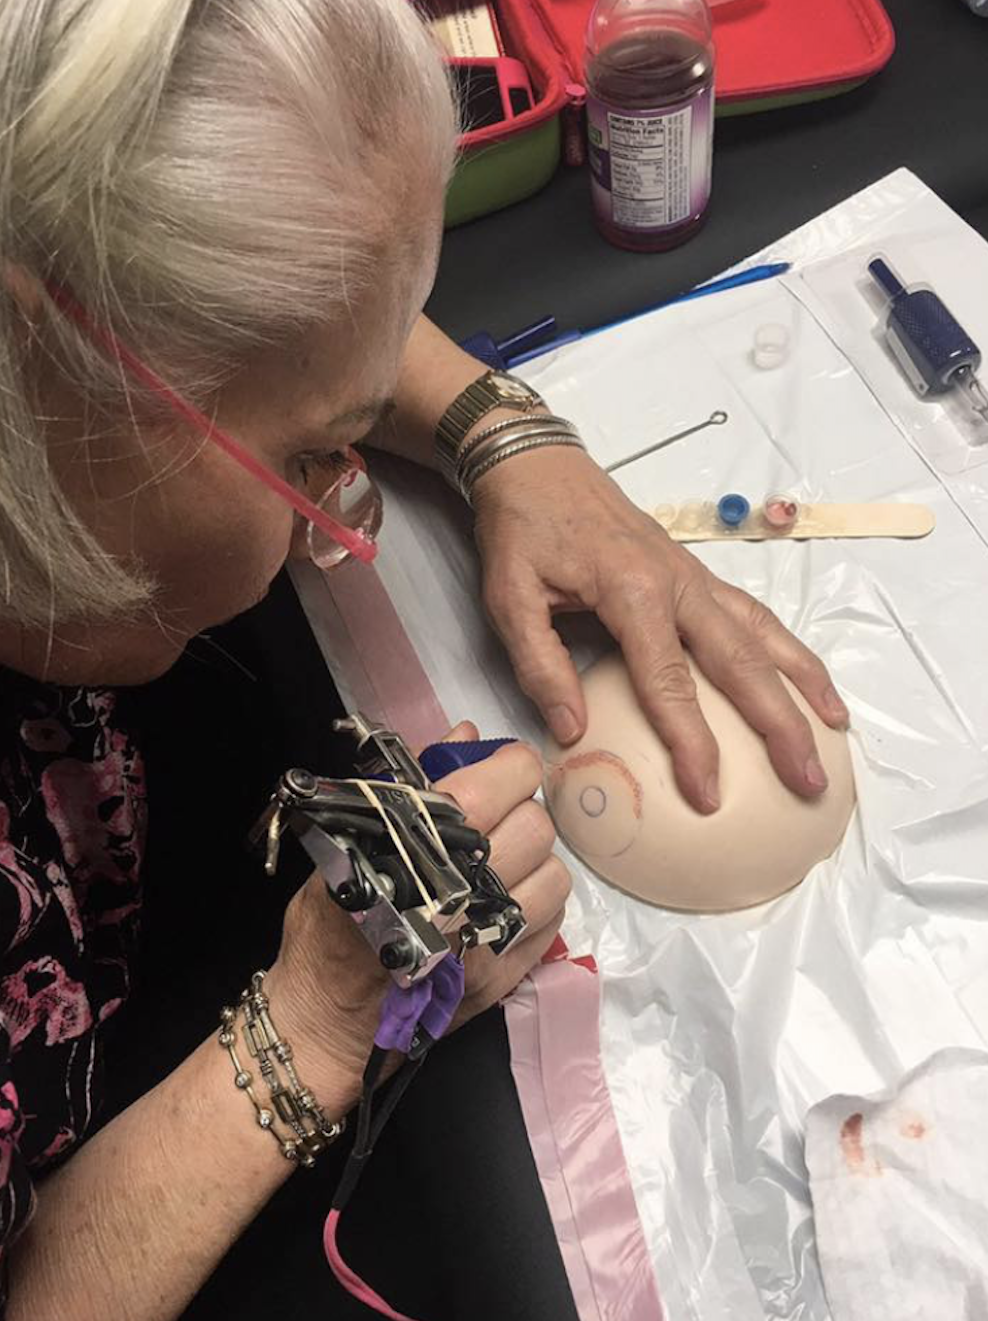 Vicky Martin 2017 review - Arkansas training day student on one of Vicky Martin's realistic life-like breast moulds